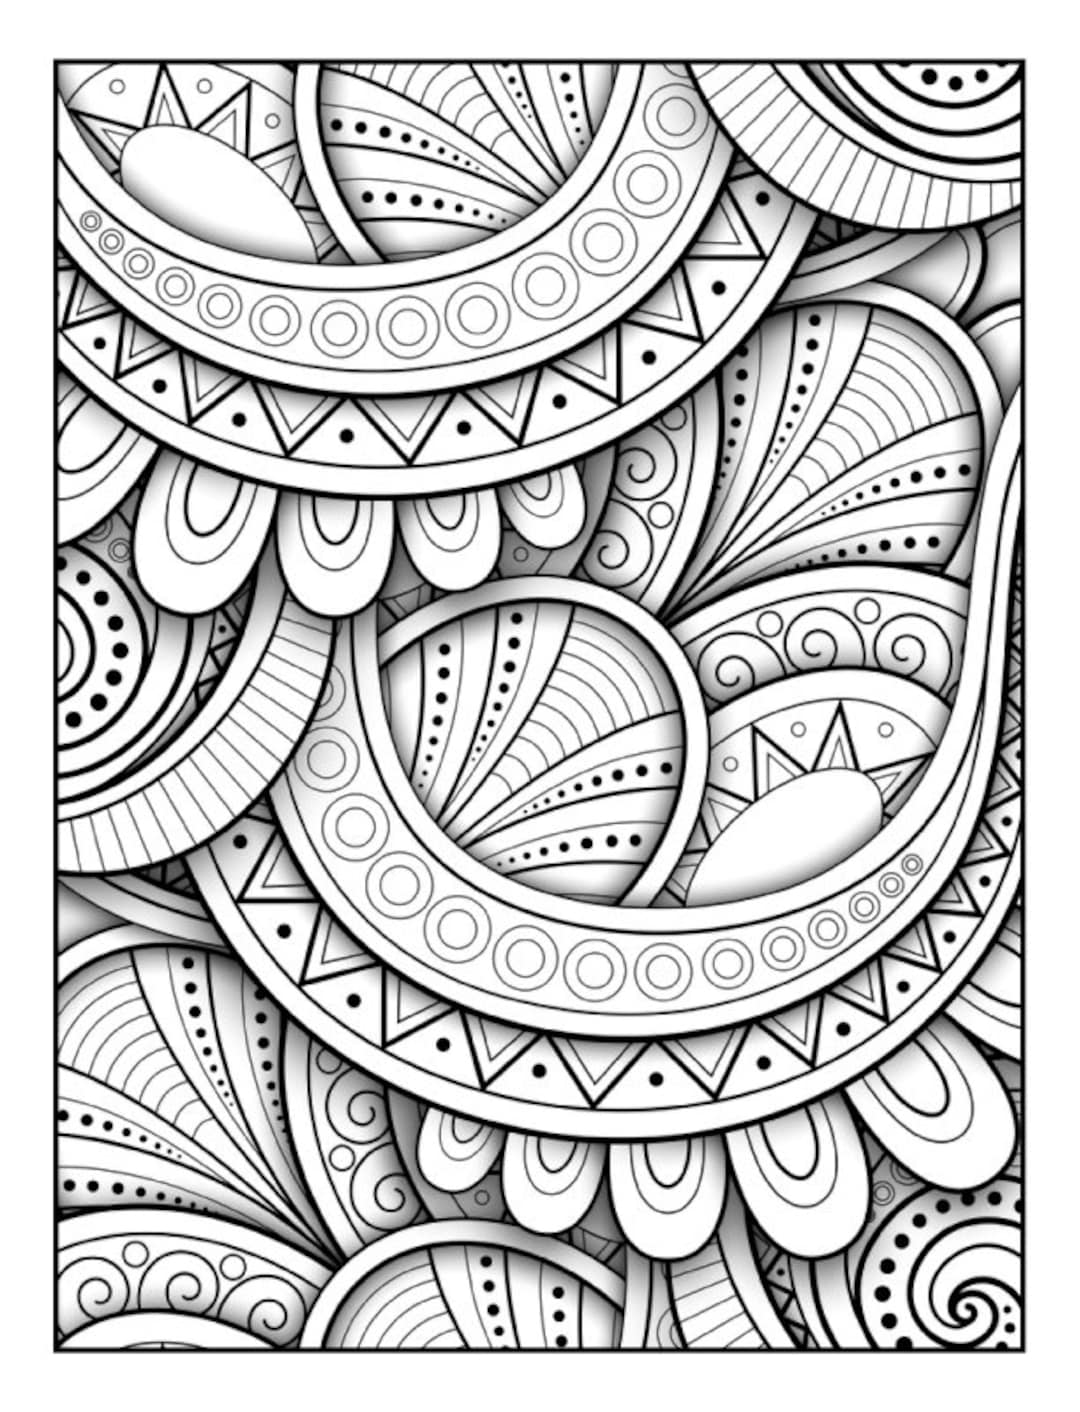 Simple patterns Coloring Book: Easy pattern Coloring Book for Adults: Easy  pattern Coloring Book Designs, Ricate Pattern Designs, Easy pattern